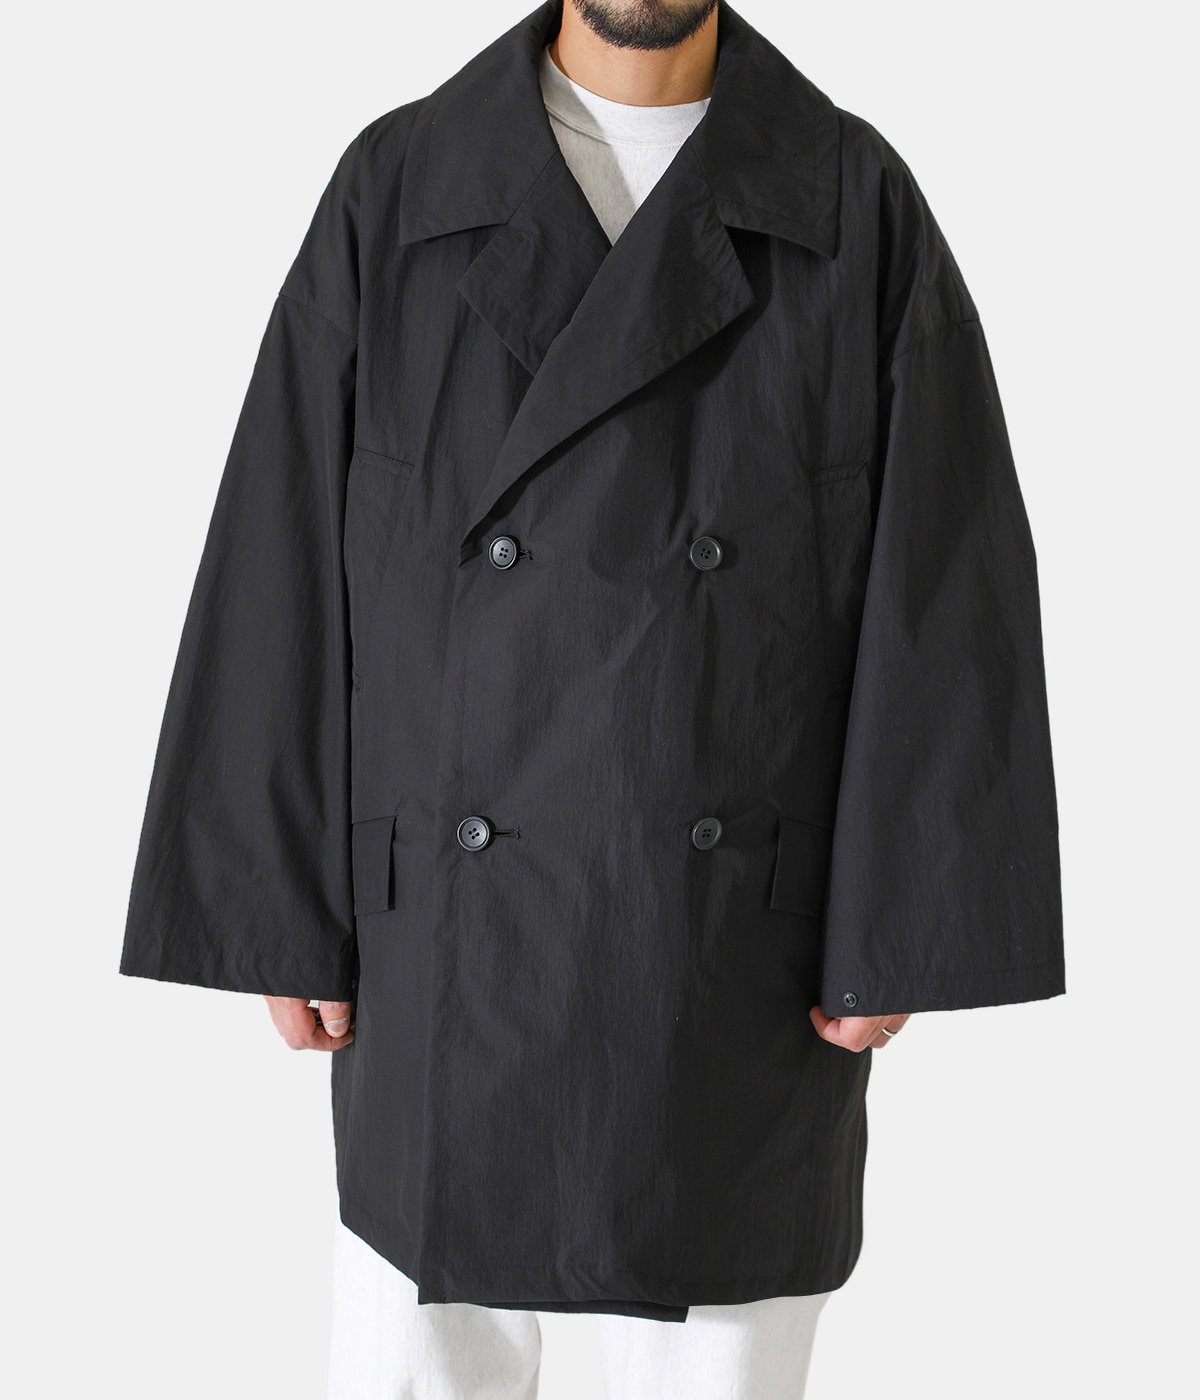 NON-BINARY S S PACKABLE COAT is-ness(イズネス) アウター コート (メンズ)の通販  ARKnets(アークネッツ) 公式通販 【正規取扱店】